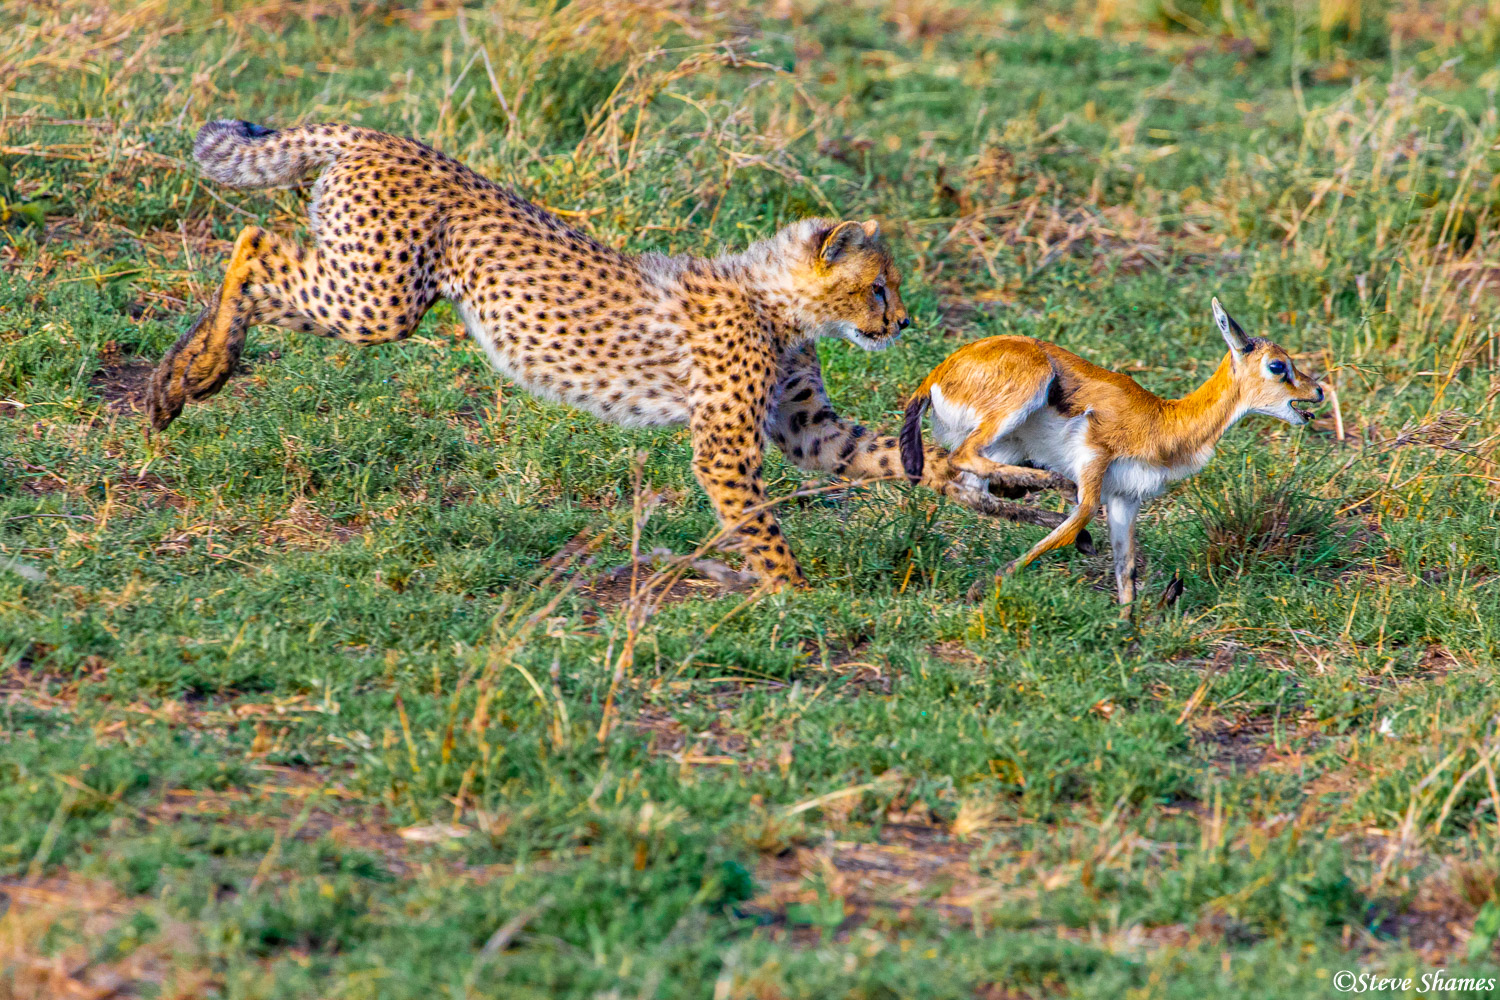 Cheetah cub practicing his chasing skills with this young Thomson's gazelle that his mother brought him.